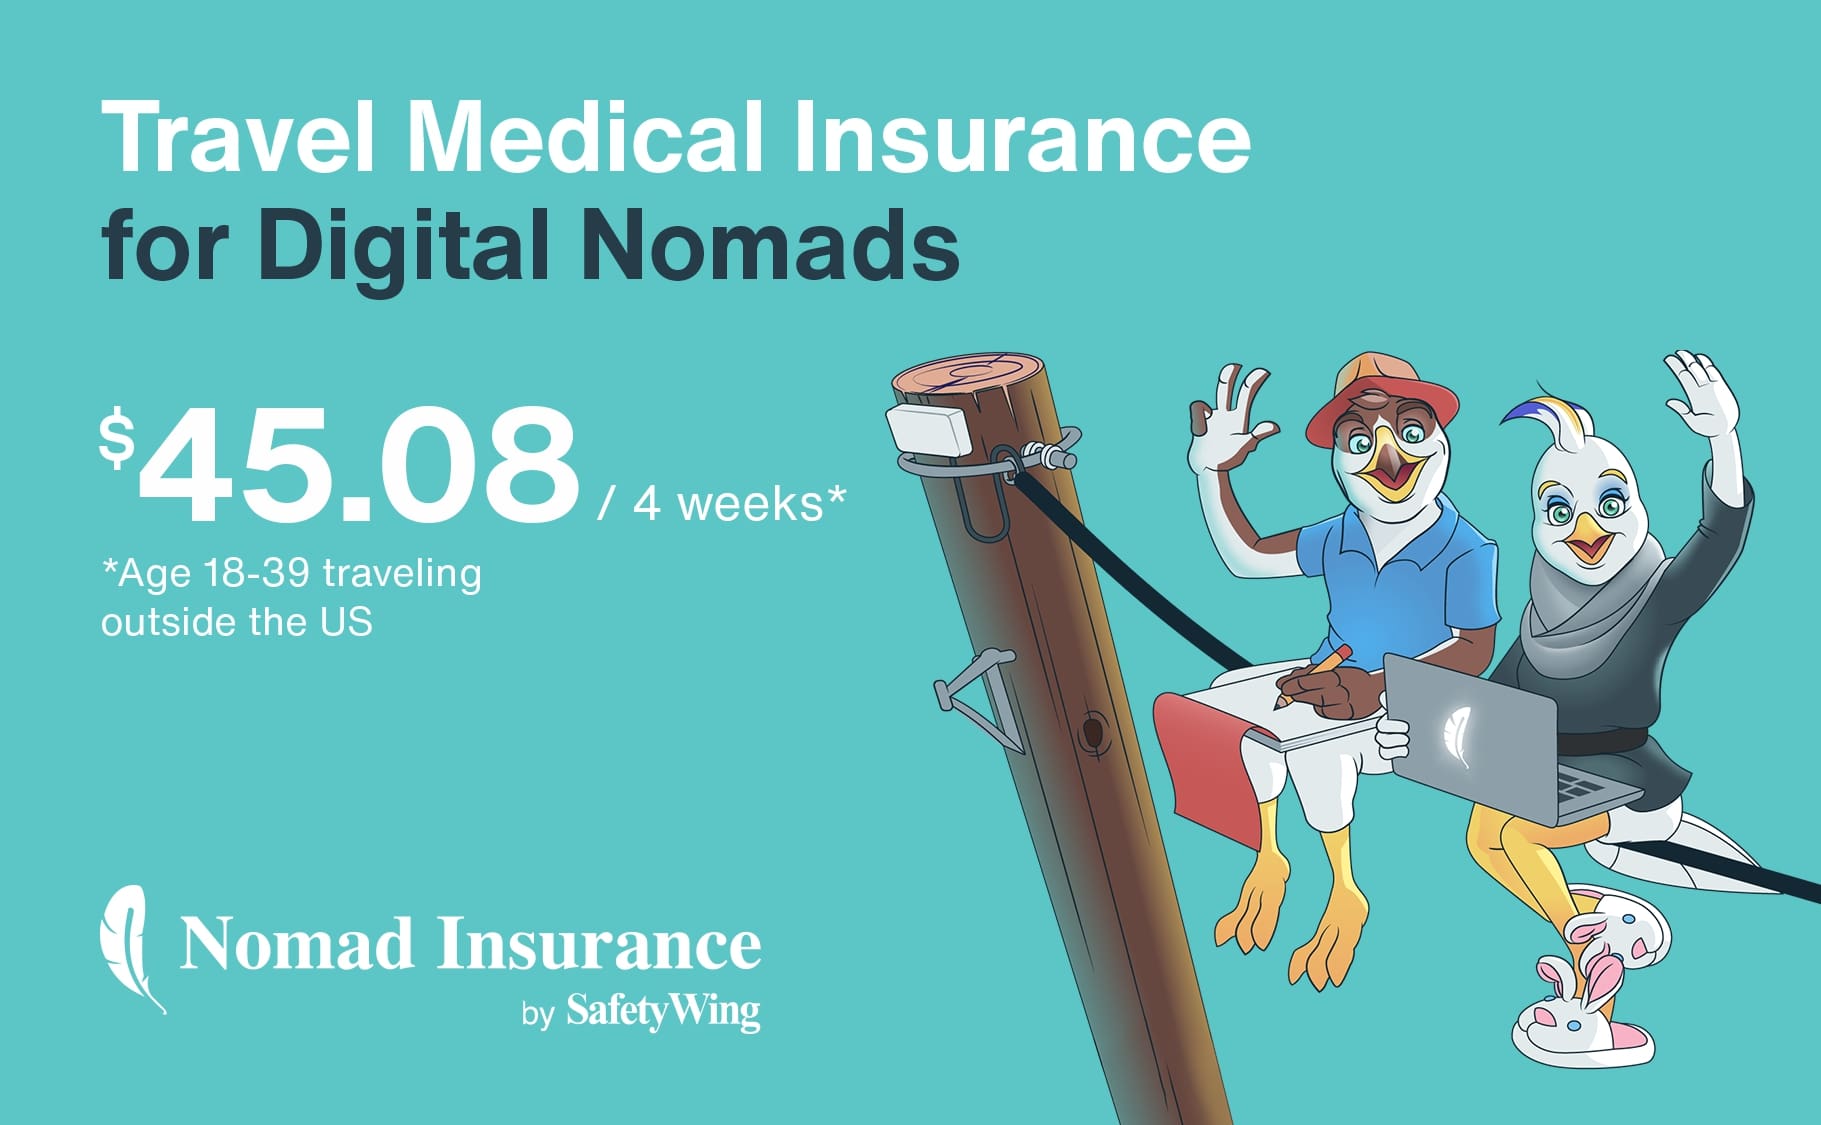 safetywing insurance, safetywing travel insurance, safetywing nomad insurance, safetywing remote health insurance, safetywing review, safetywing insurance review